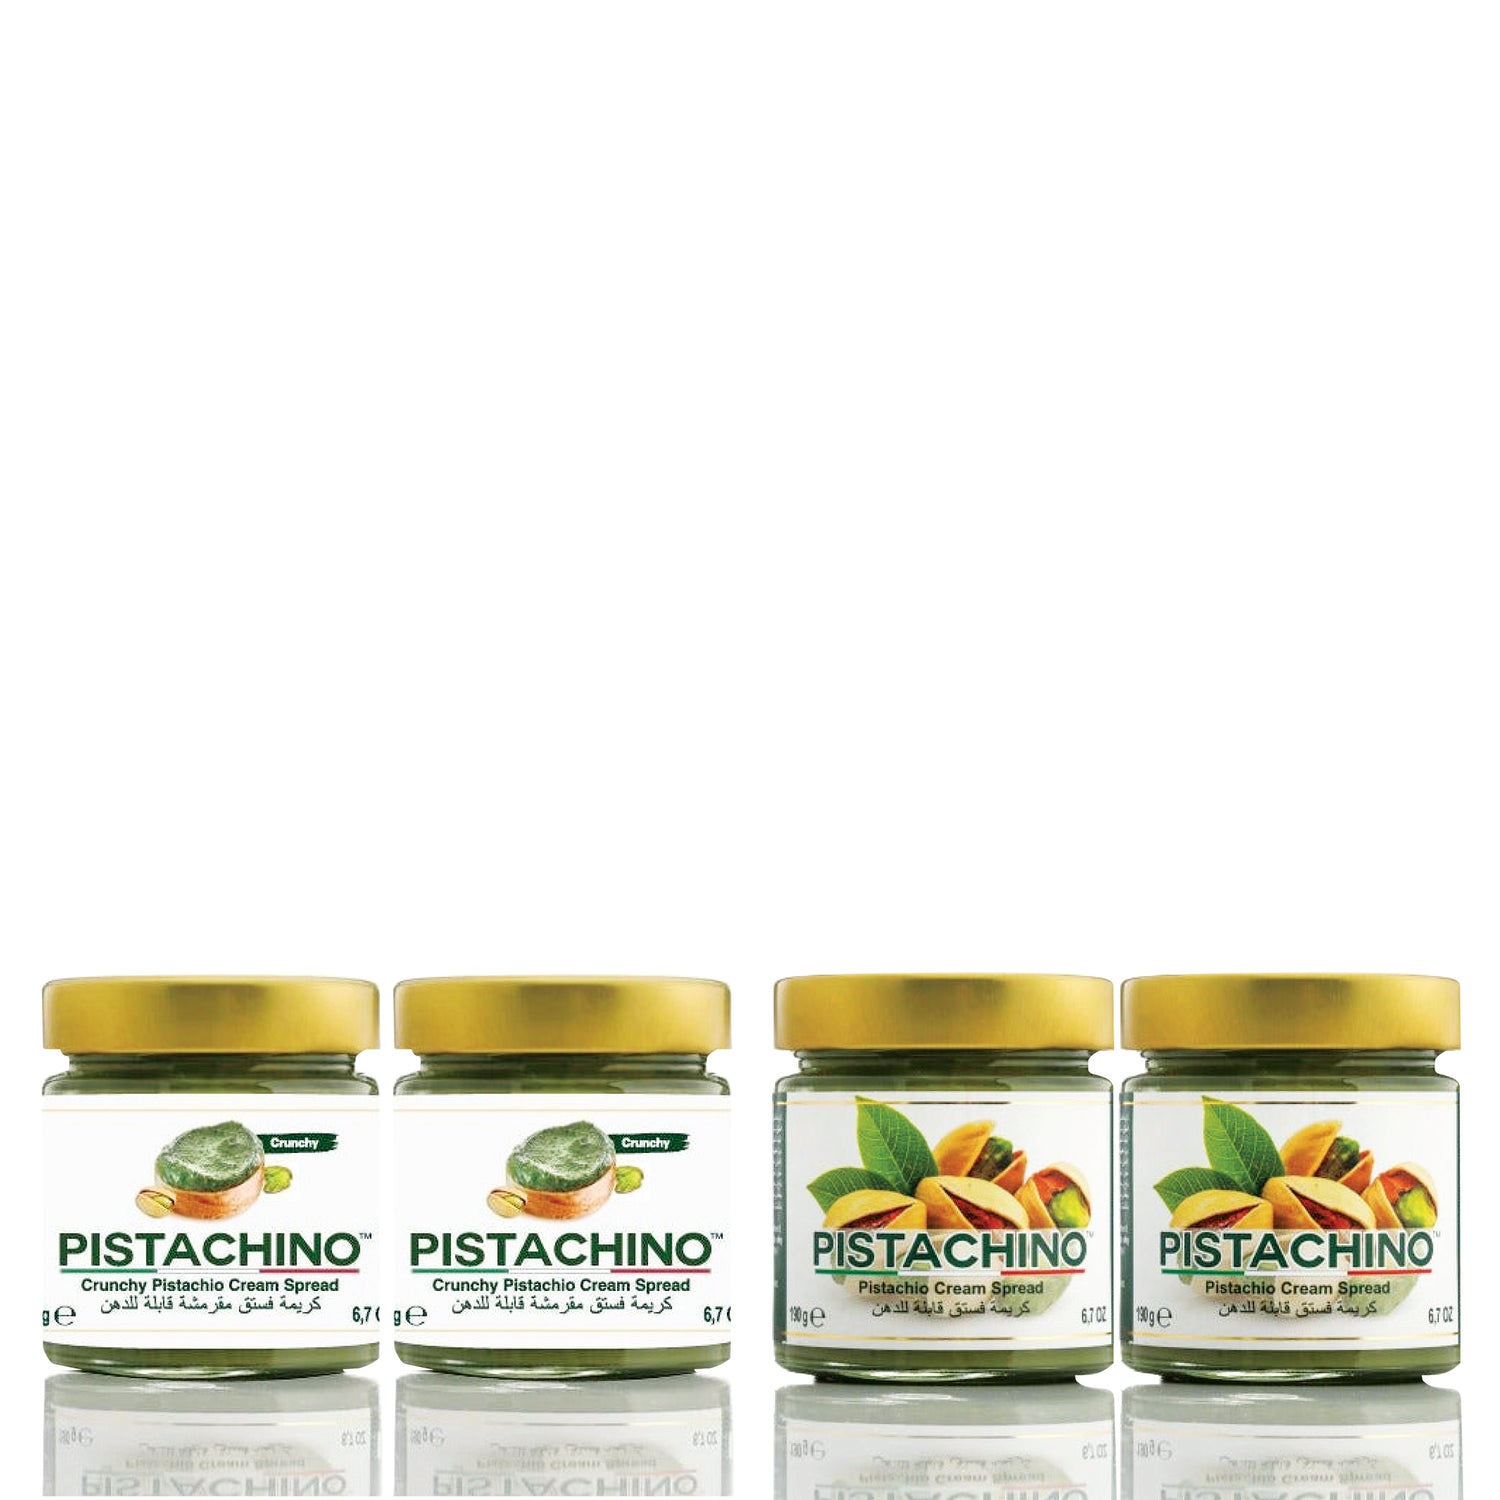 The Family Bundle (2 Smooth 190g and 2 Crunchy Spreads 190g)